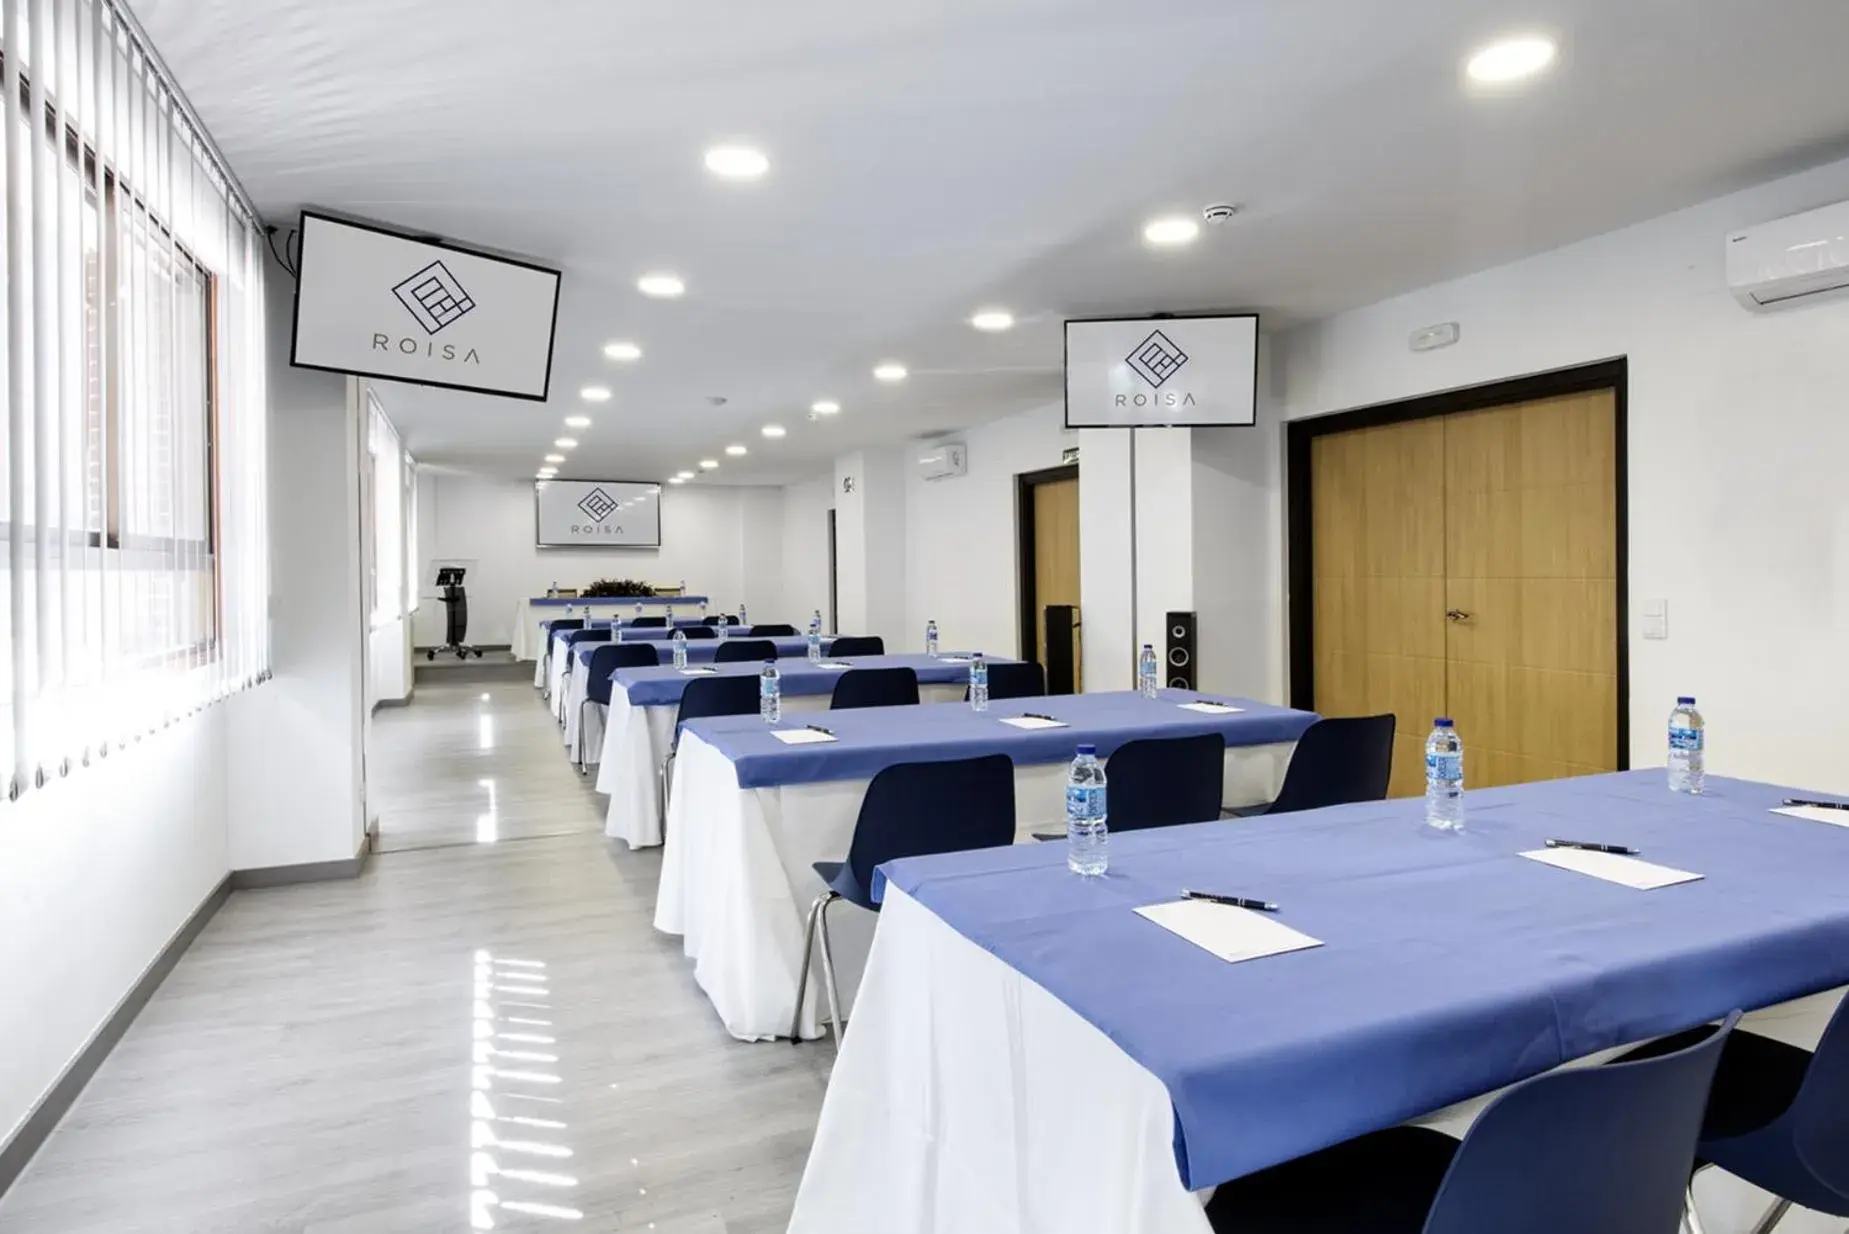 Business facilities in Roisa Hostal Boutique